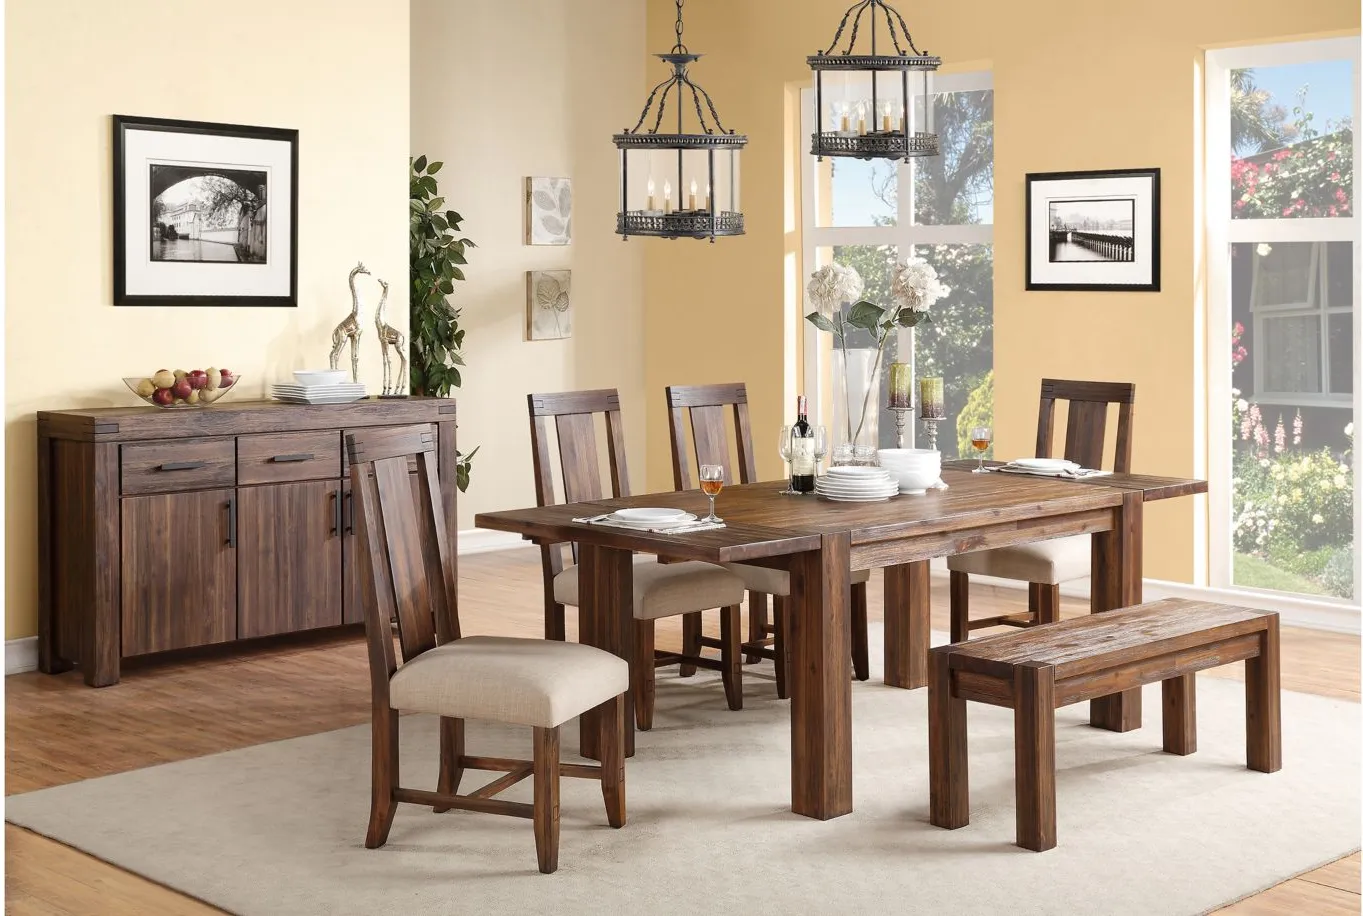 Middlefield 6-pc. Dining Set w/ Upholstered Chairs and Bench in Brick Brown by Bellanest